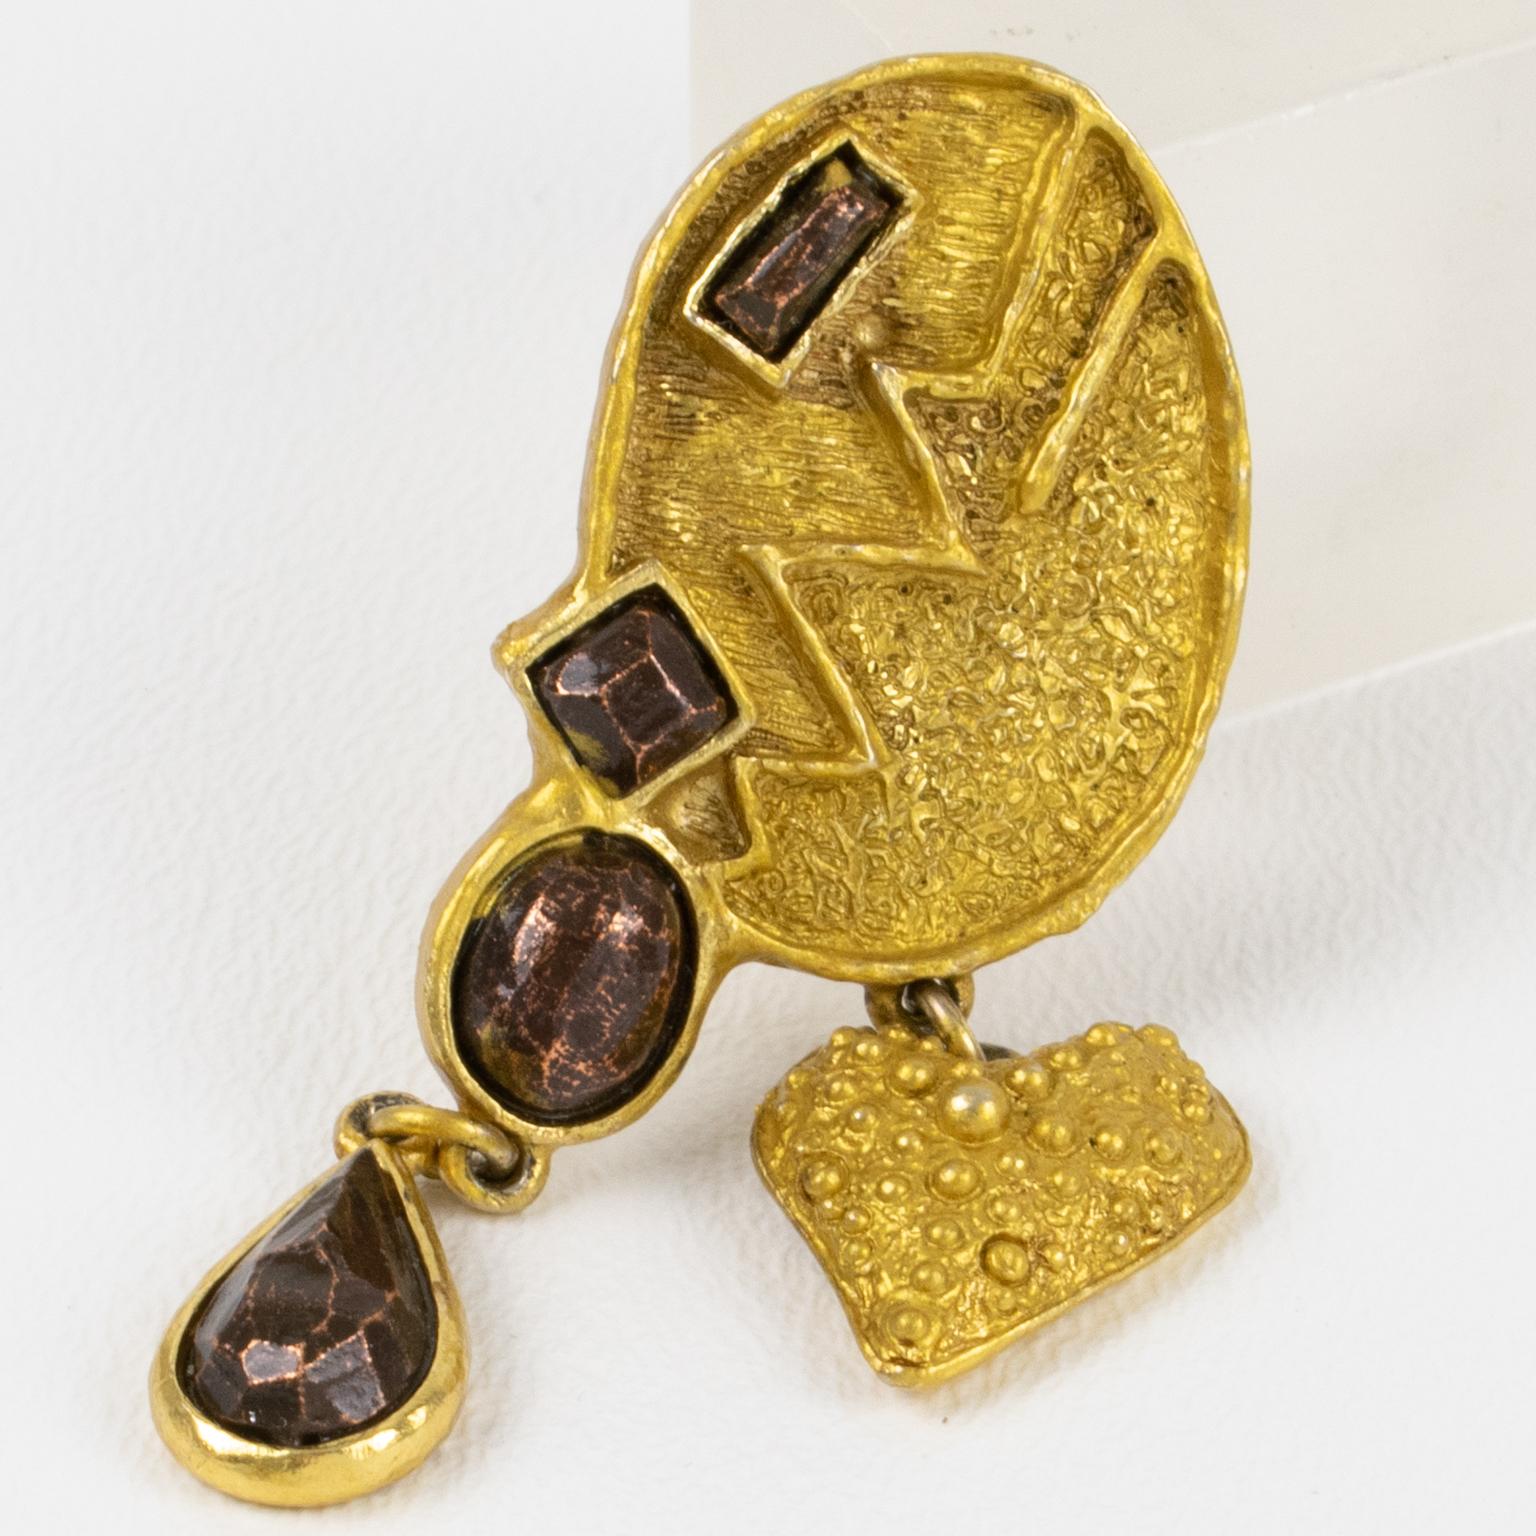 Christian Lacroix Modernist Gilt Metal Pin Brooch with Bronze Cabochons In Good Condition For Sale In Atlanta, GA